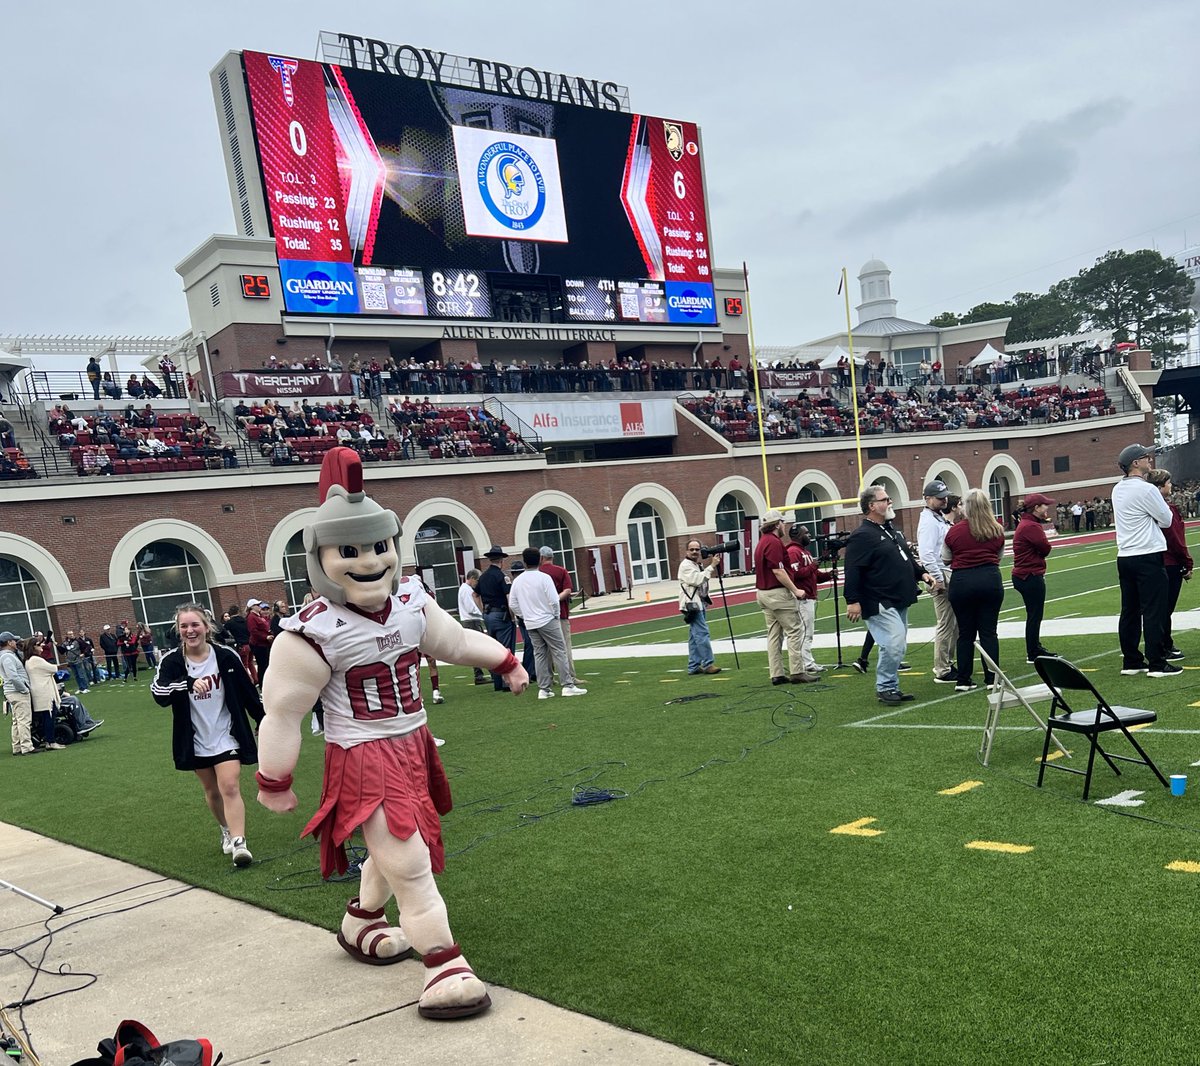 Congratulations to @TroyAthletics for the 10-9 win over the @ArmyWP_Football. Both teams played a great defensive game that kept us on the edge of our seat. #OneTROY